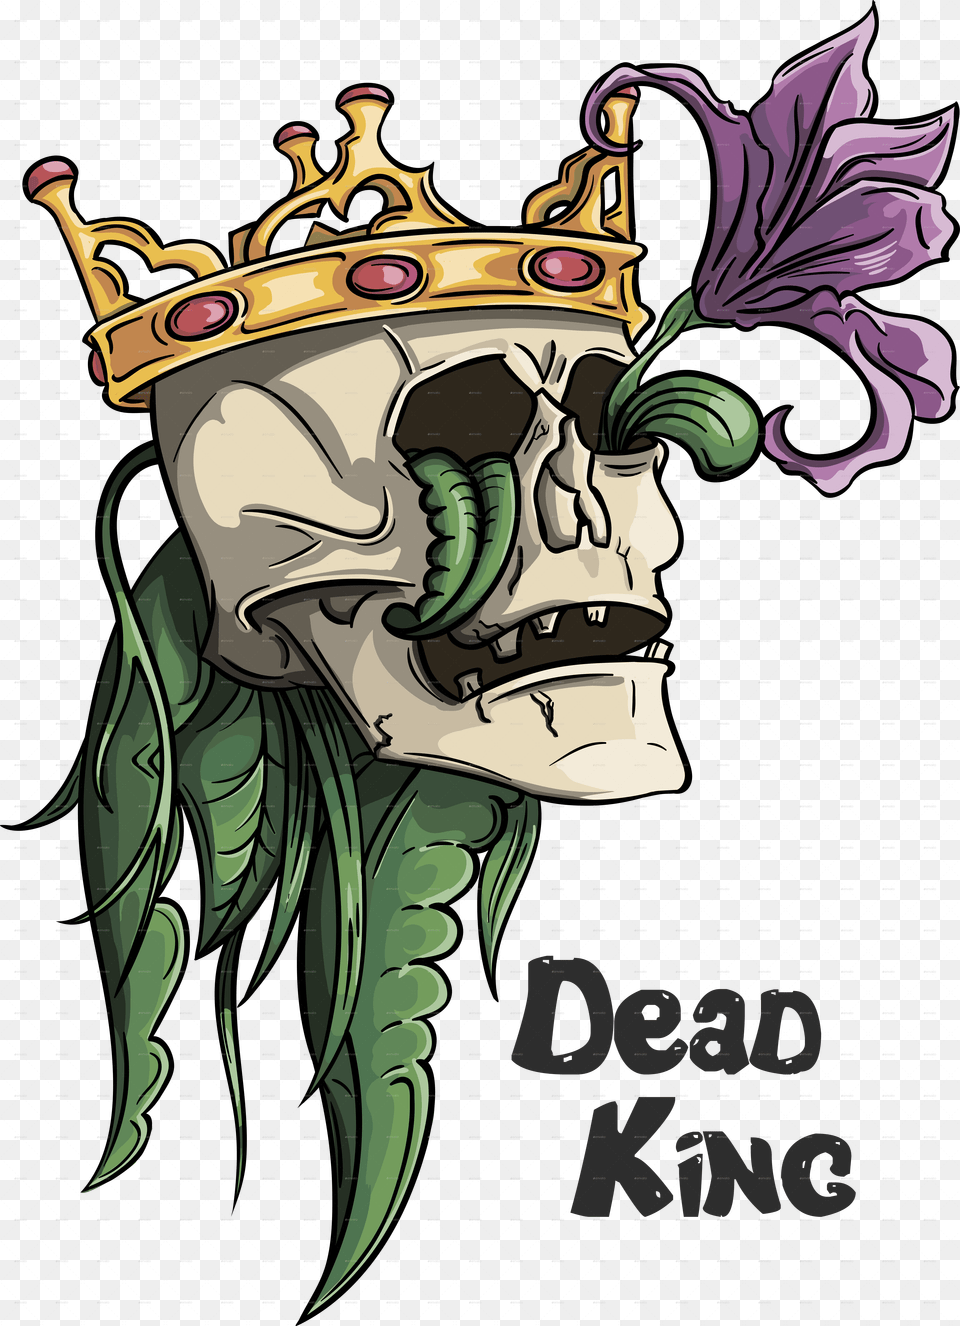 Dead King, Accessories, Jewelry, Crown Png